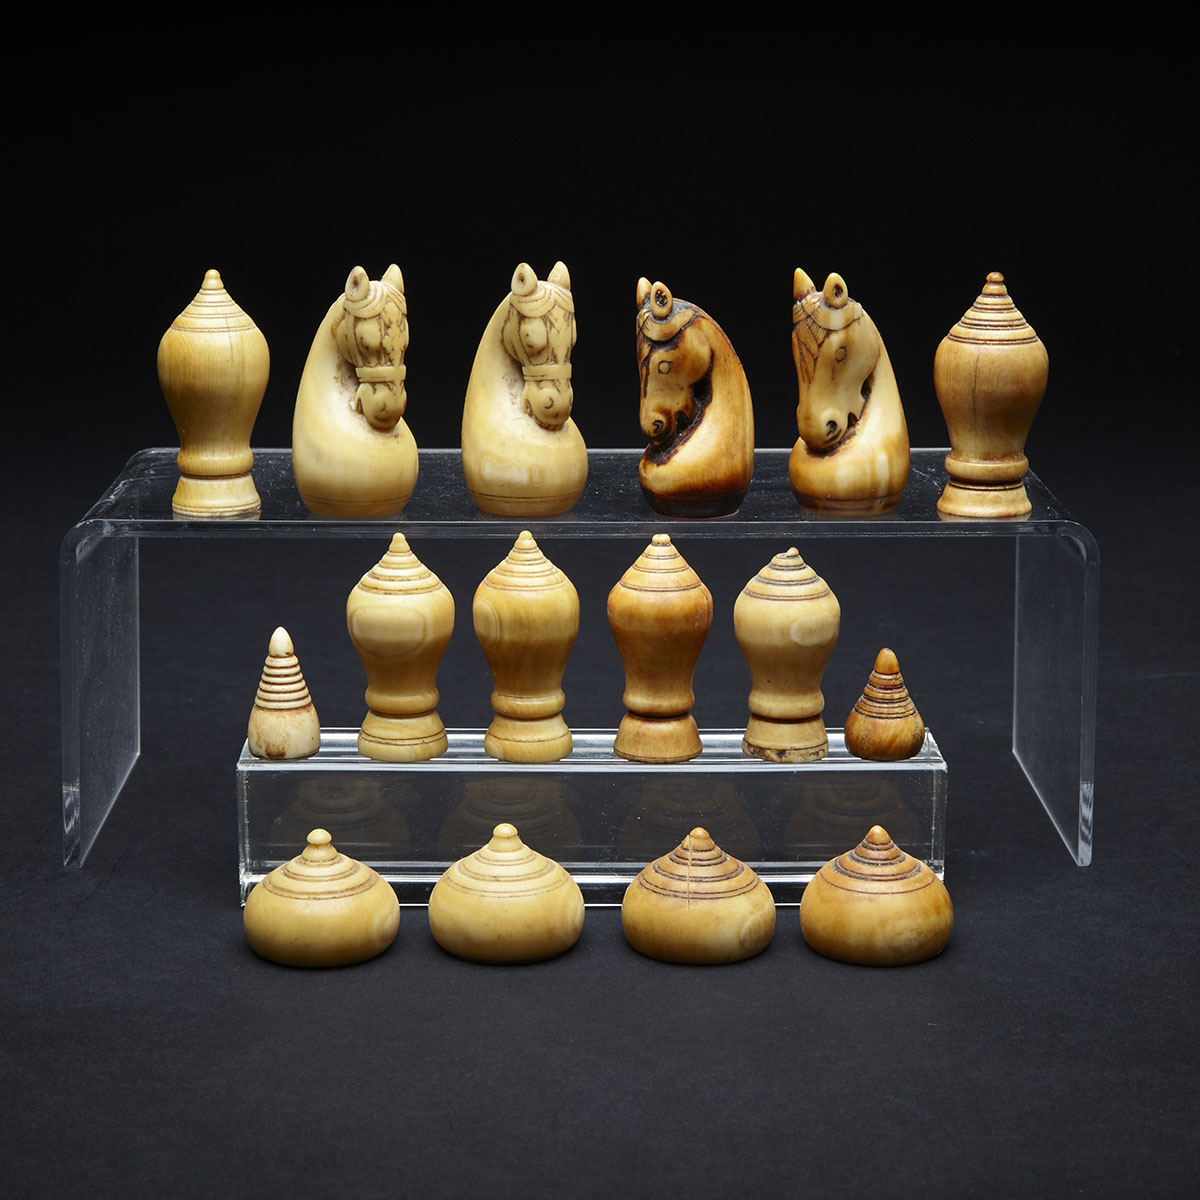 Sixteen Cambodian Turned and Carved Ivory Chess Pieces, early 19th century